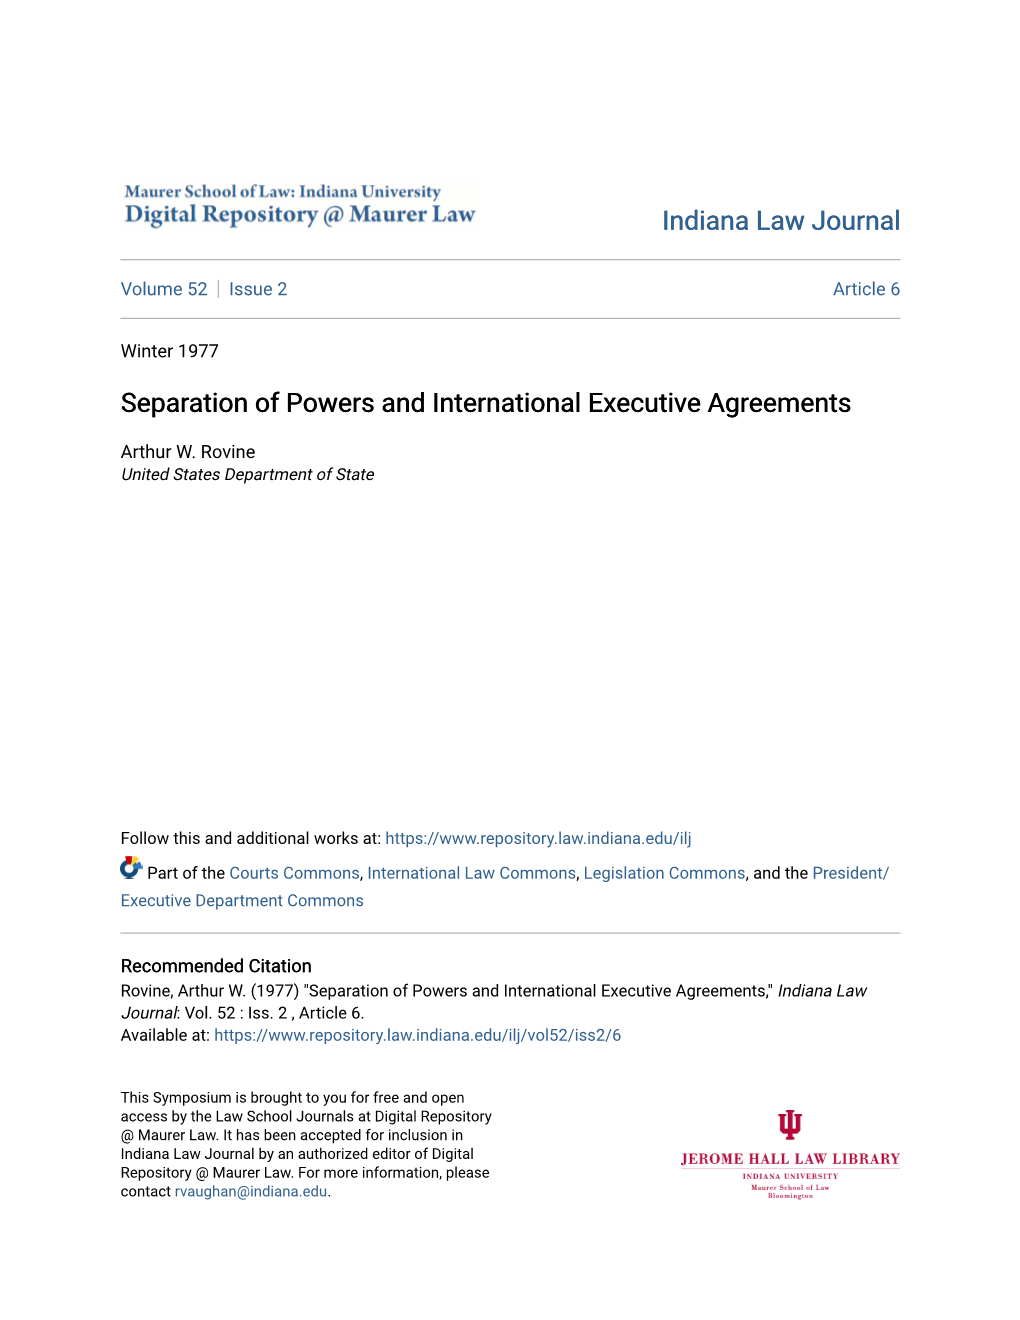 Separation of Powers and International Executive Agreements